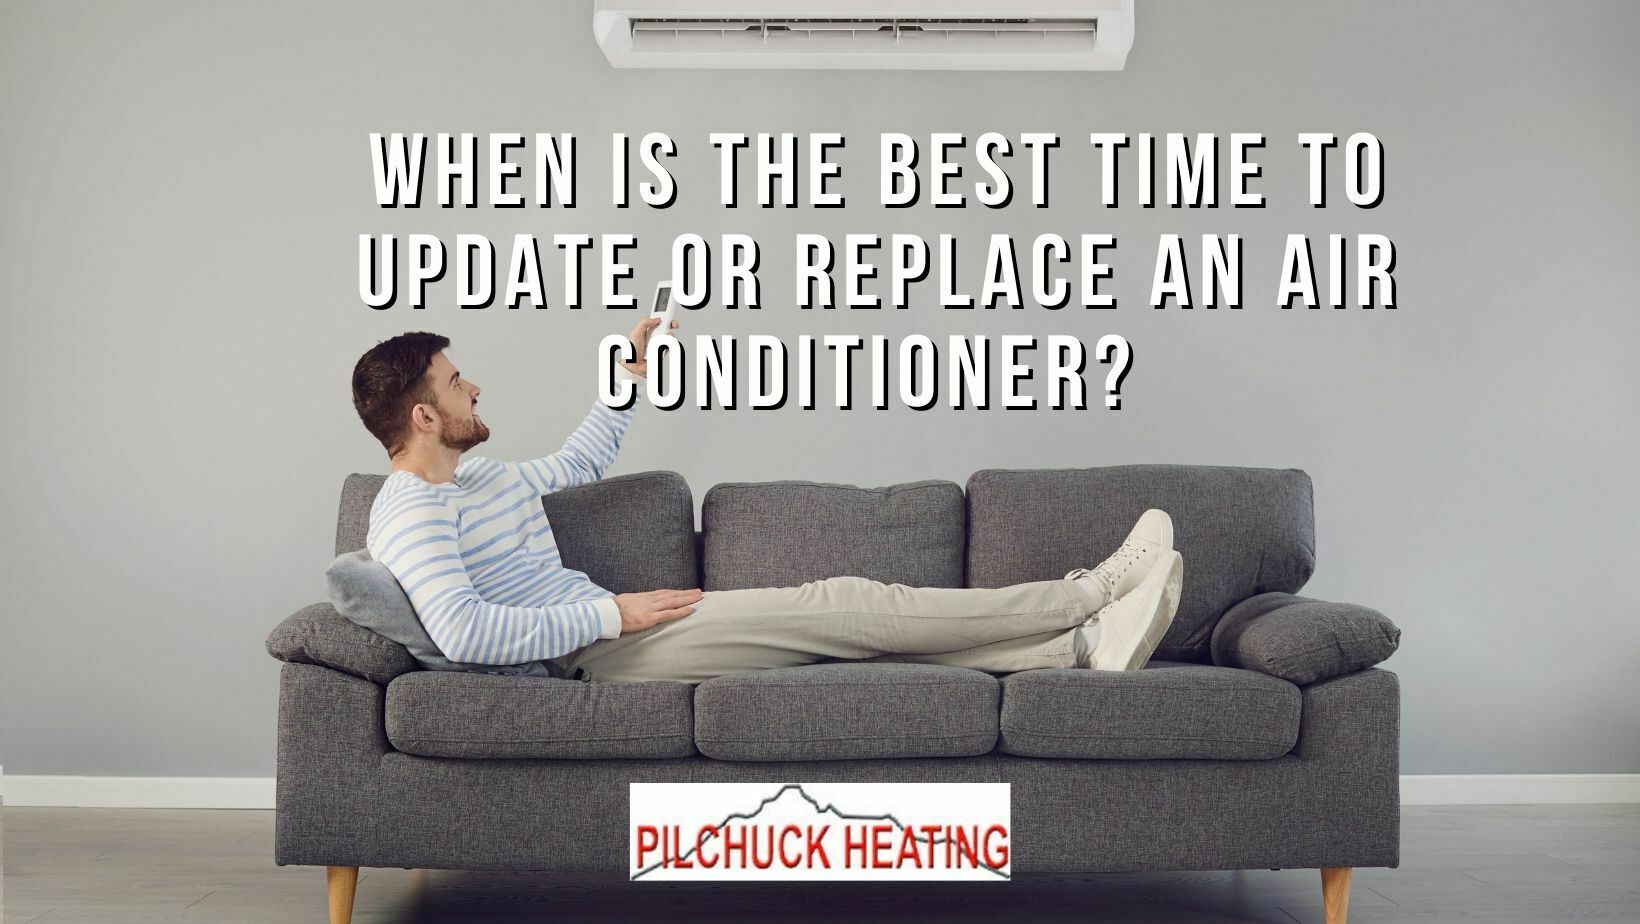 When is the Best Time to Update or Replace an Air Conditioner